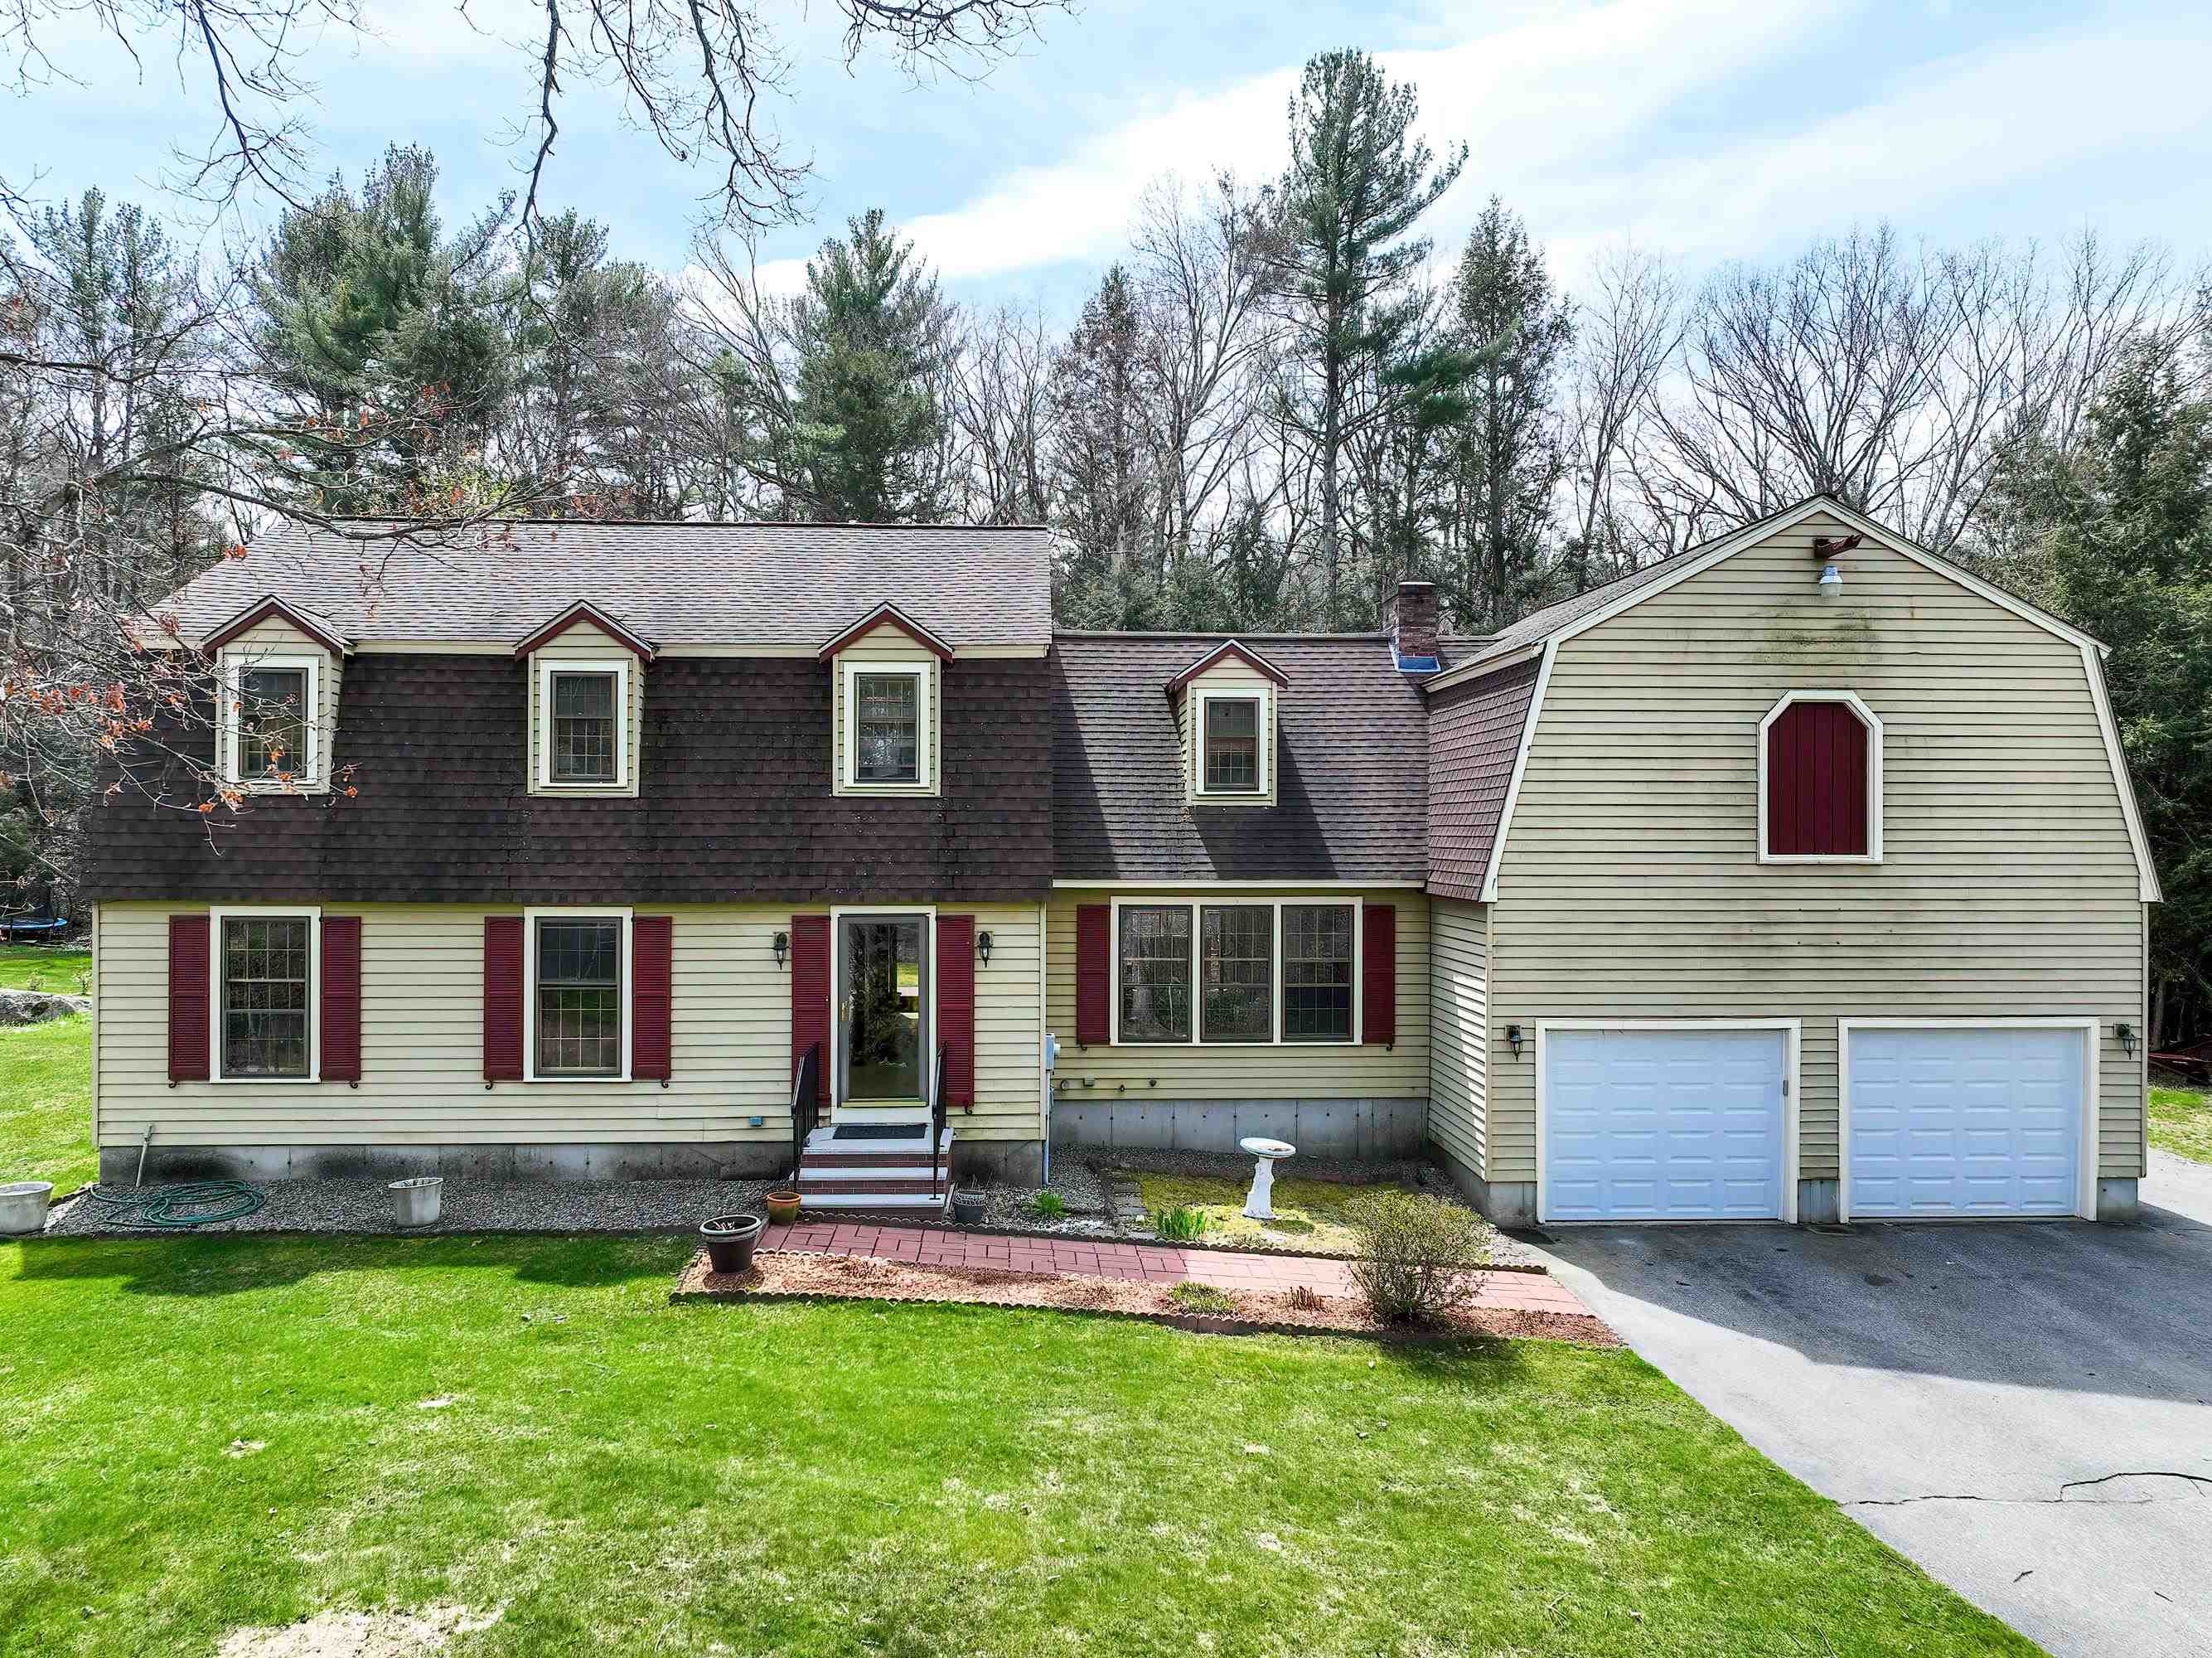 This Beautiful Gambrel in a sought after Windham neighborhood paints a vivid picture of a charming and inviting home! The ample lot size and thoughtful landscaping, including flower beds and blueberry trees, create an idyllic setting. Inside, the gleaming hardwood floors convey a sense of warmth and elegance. The open layout between the dining room, kitchen and family room promotes seamless flow and encourages gatherings. The eat-in kitchen adjacent to the family room enhances the functionality and sociability of the space.  Off the family room you will find the three-season porch a delightful retreat, offering serene views of the private backyard. The practical features, such as the huge mudroom with laundry facilities and the oversized two-car garage, add convenience and efficiency to daily living. The second floor is a haven of comfort with its four spacious bedrooms, including the luxurious primary bedroom suite featuring dual vanities and a walk-in closet. In addition, the unfinished space over the garage presents an exciting opportunity for customization and expansion, allowing homeowners to increase the home's sqft and potentially enhance its value instantly. Finally, the partially finished basement offers versatile options for use, as a home office, a cozy teen retreat, or a dedicated workout area. With so much to offer potential buyers will likely appreciate the opportunity to explore and discover the numerous upgrades and amenities firsthand!